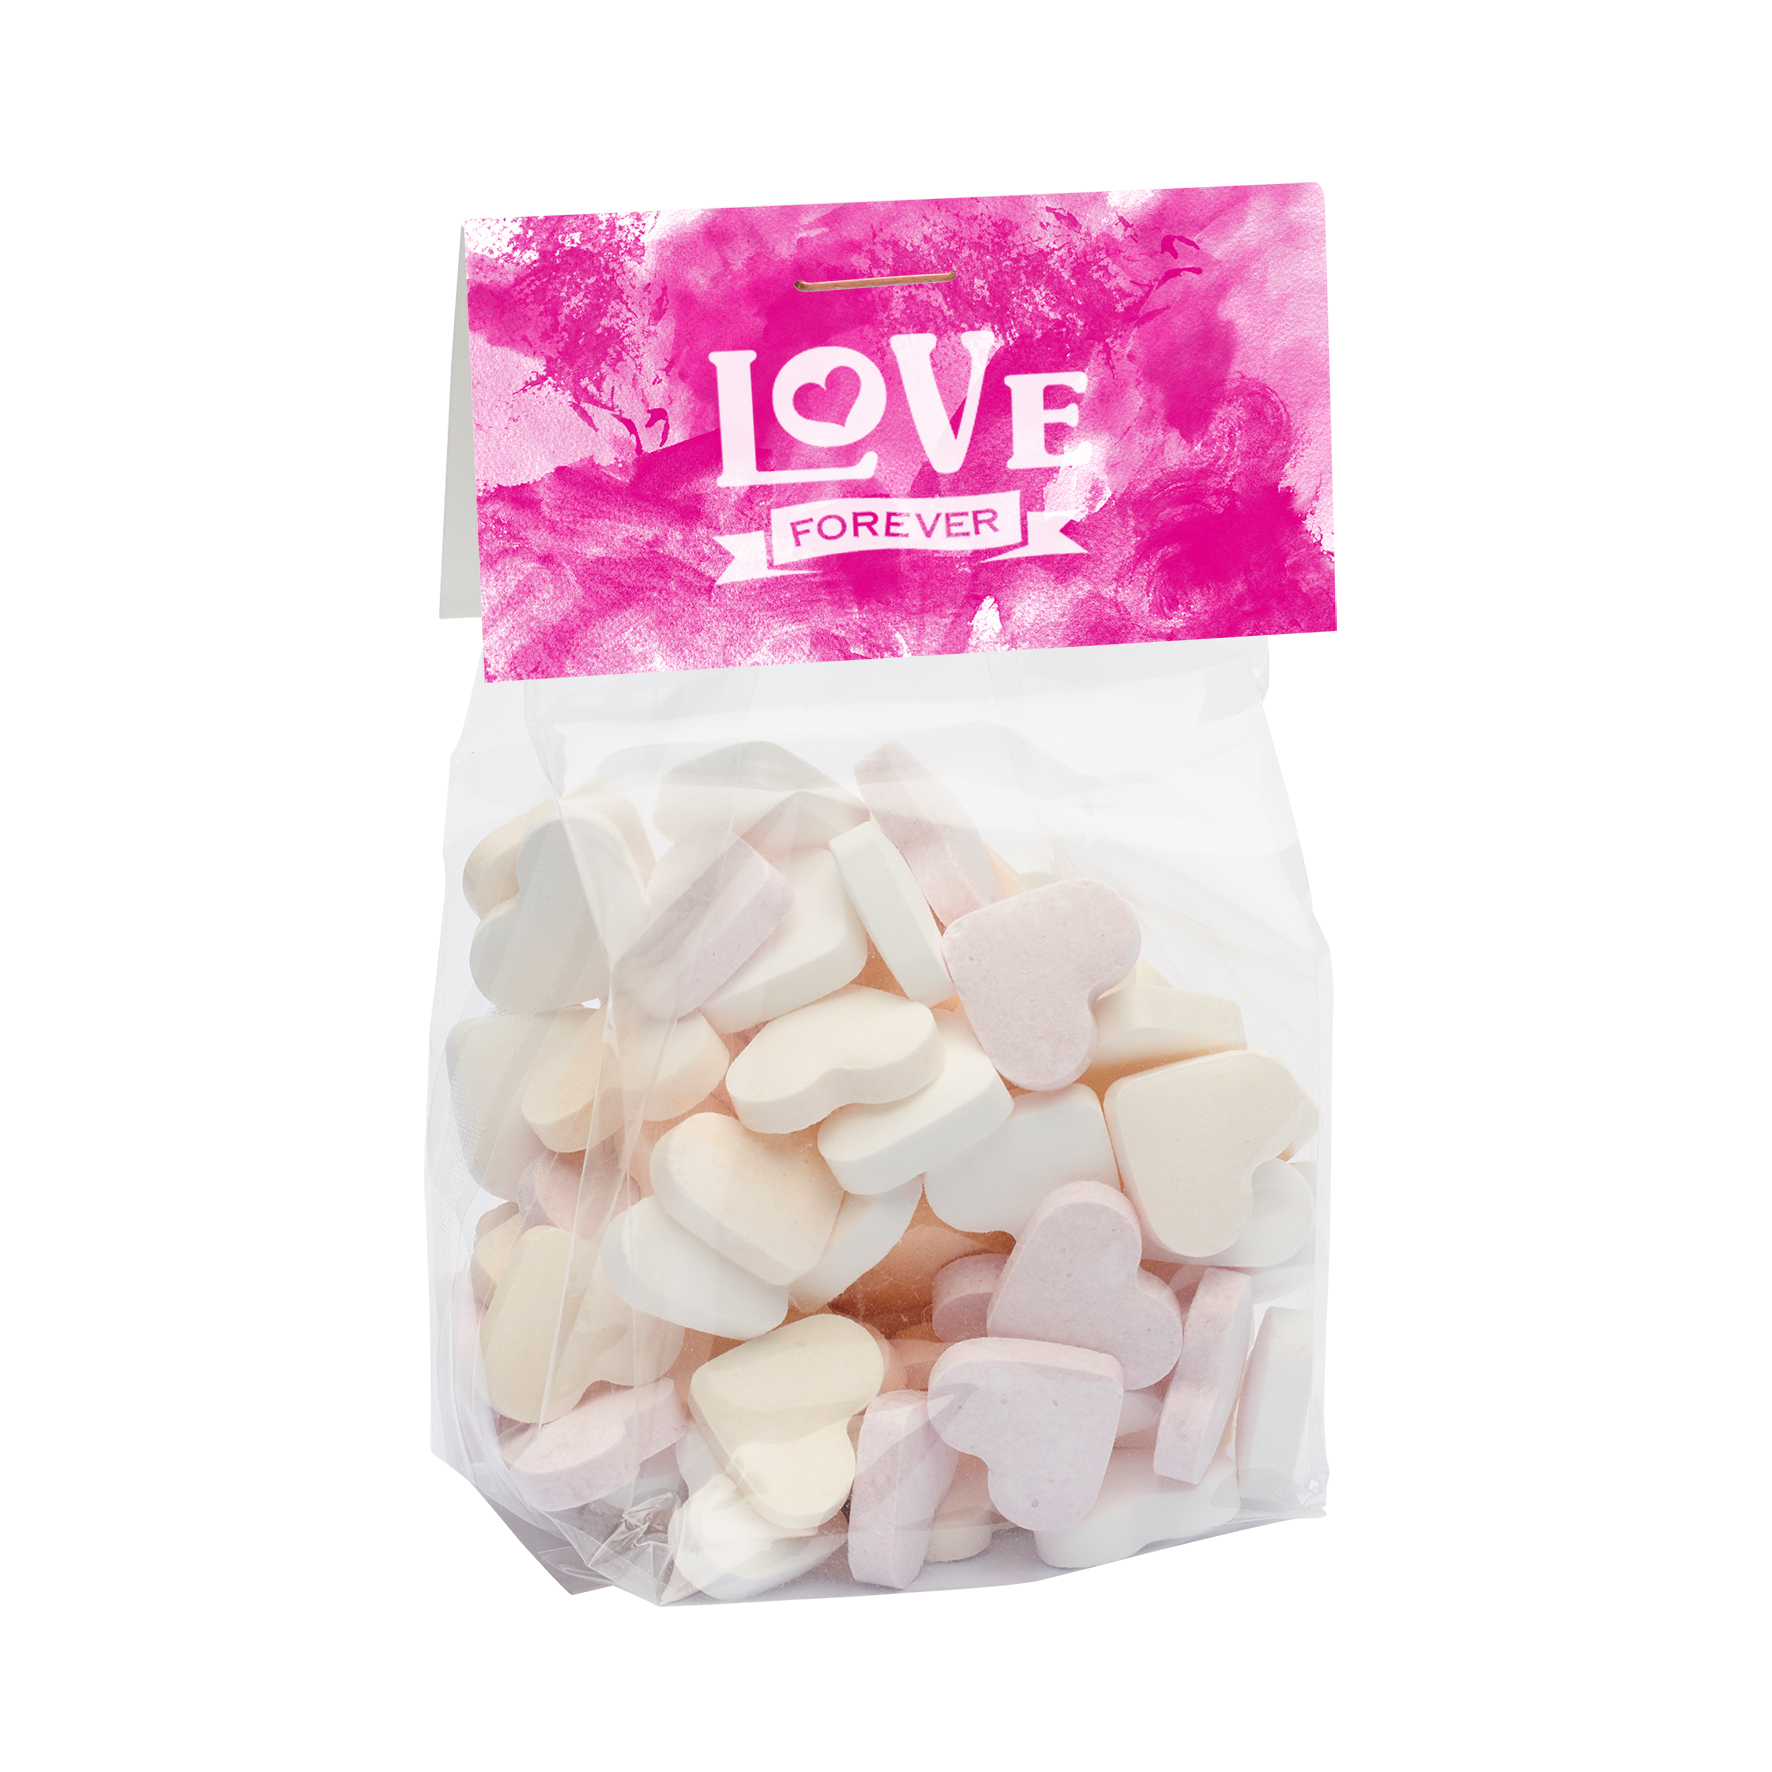 c 0630hs 00 09 - 150gr Bag with a card base and printed header board filled with extra strong mints